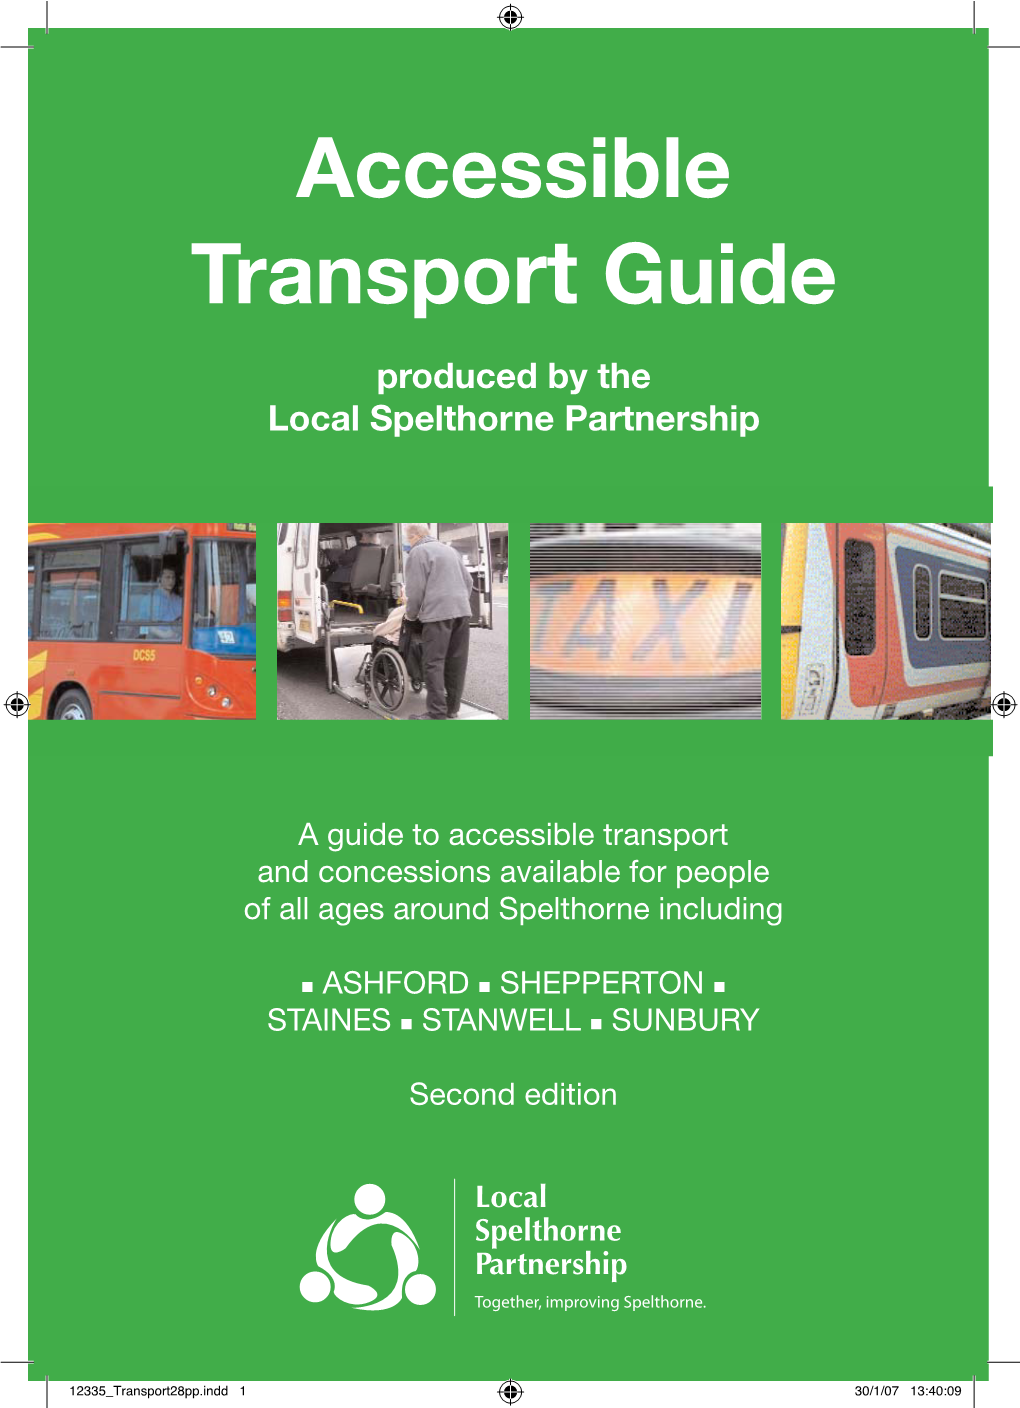 Accessible Transport Guide